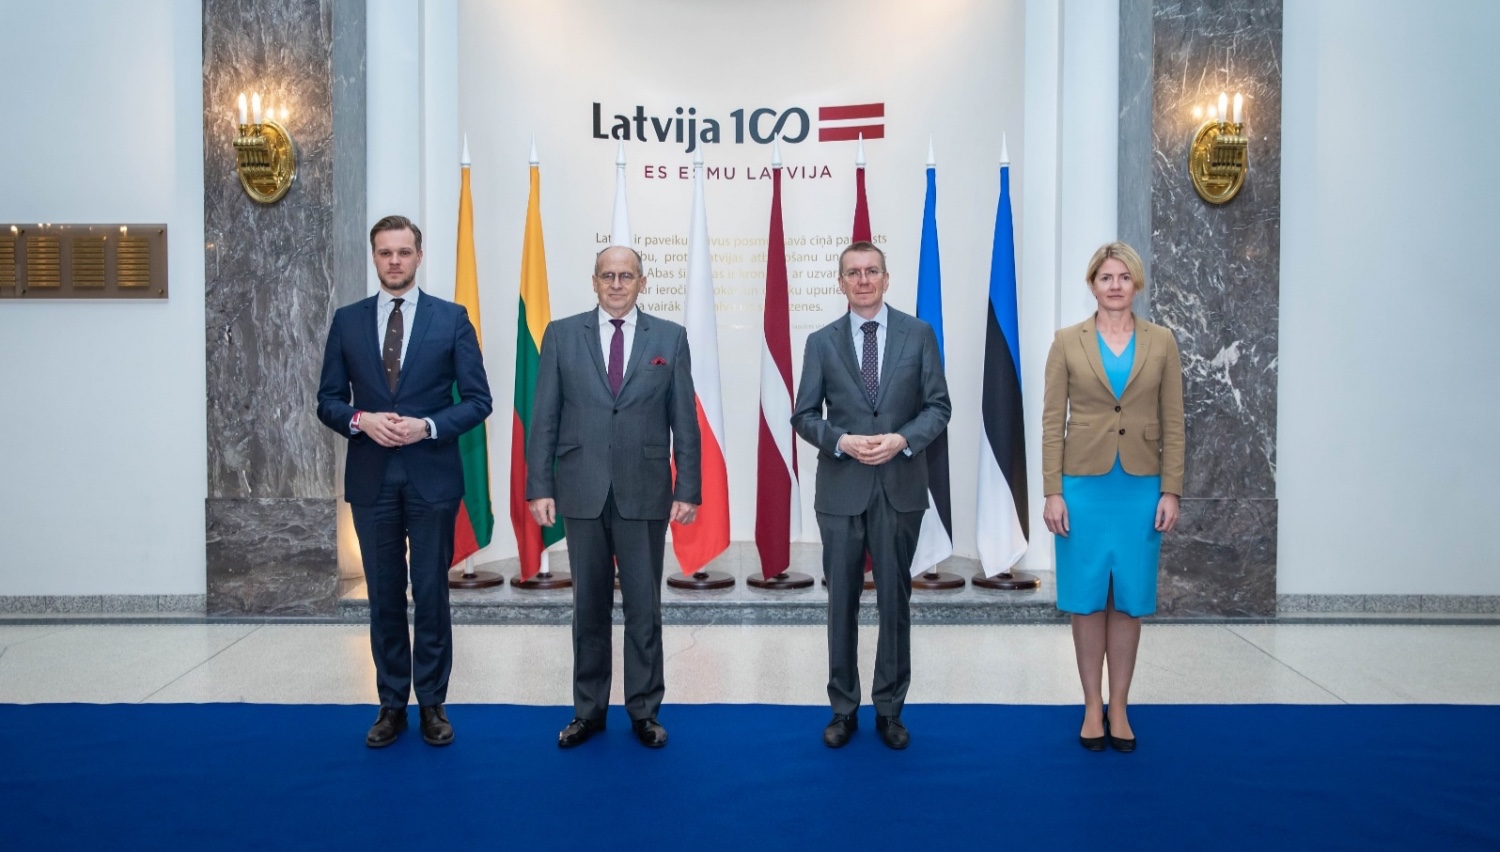 FMs of Poland and the Baltic states want more NATO forces in the region